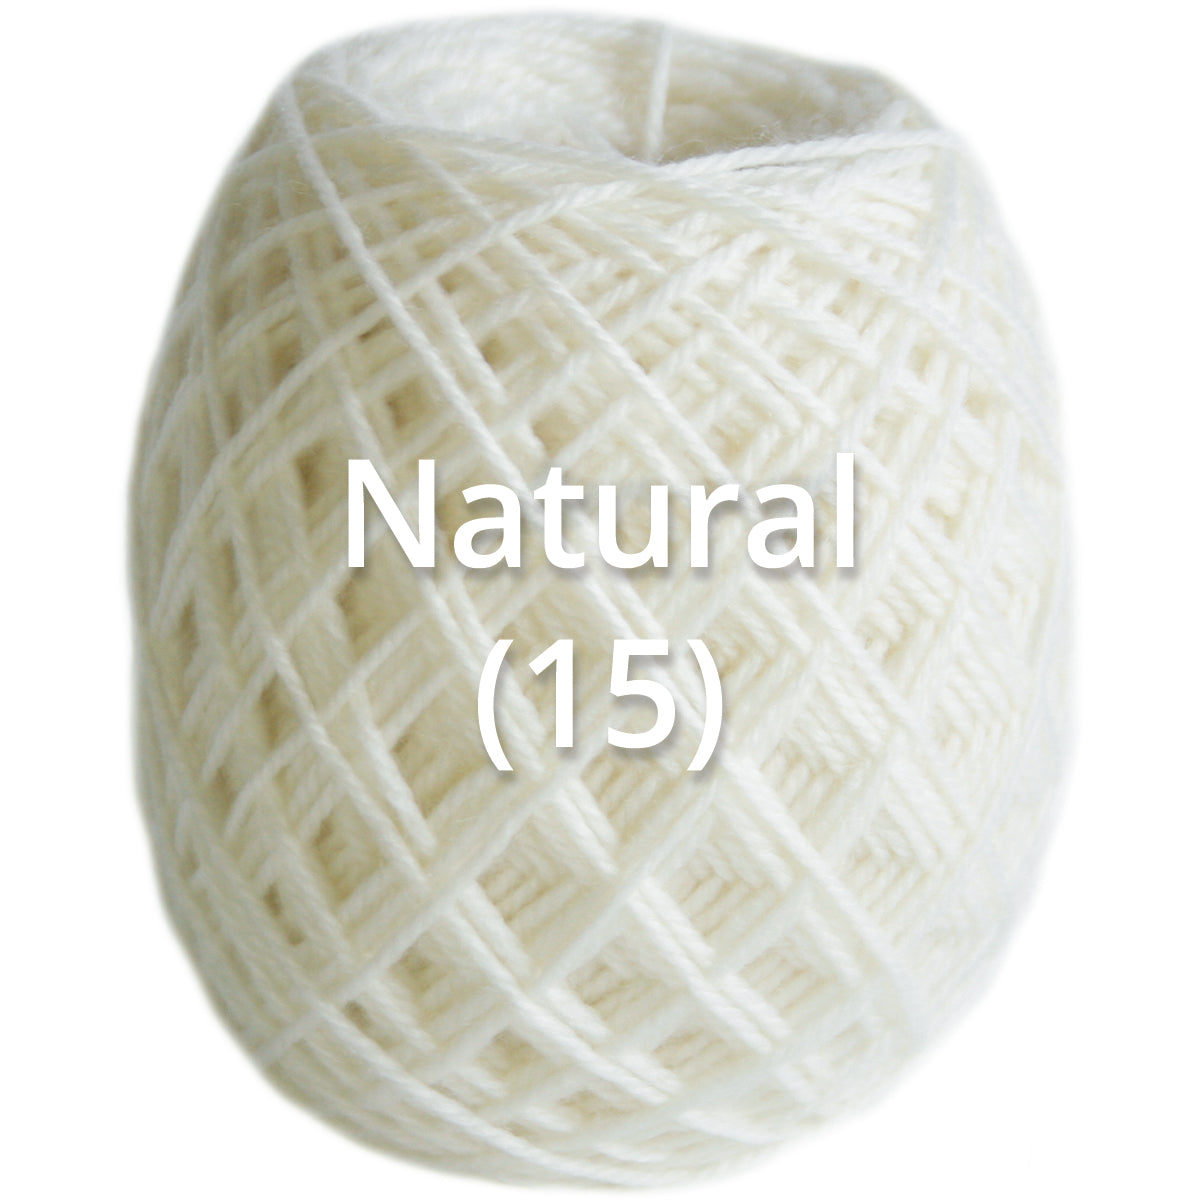 Natural - Nundle Collection 4 Ply Sock Yarn